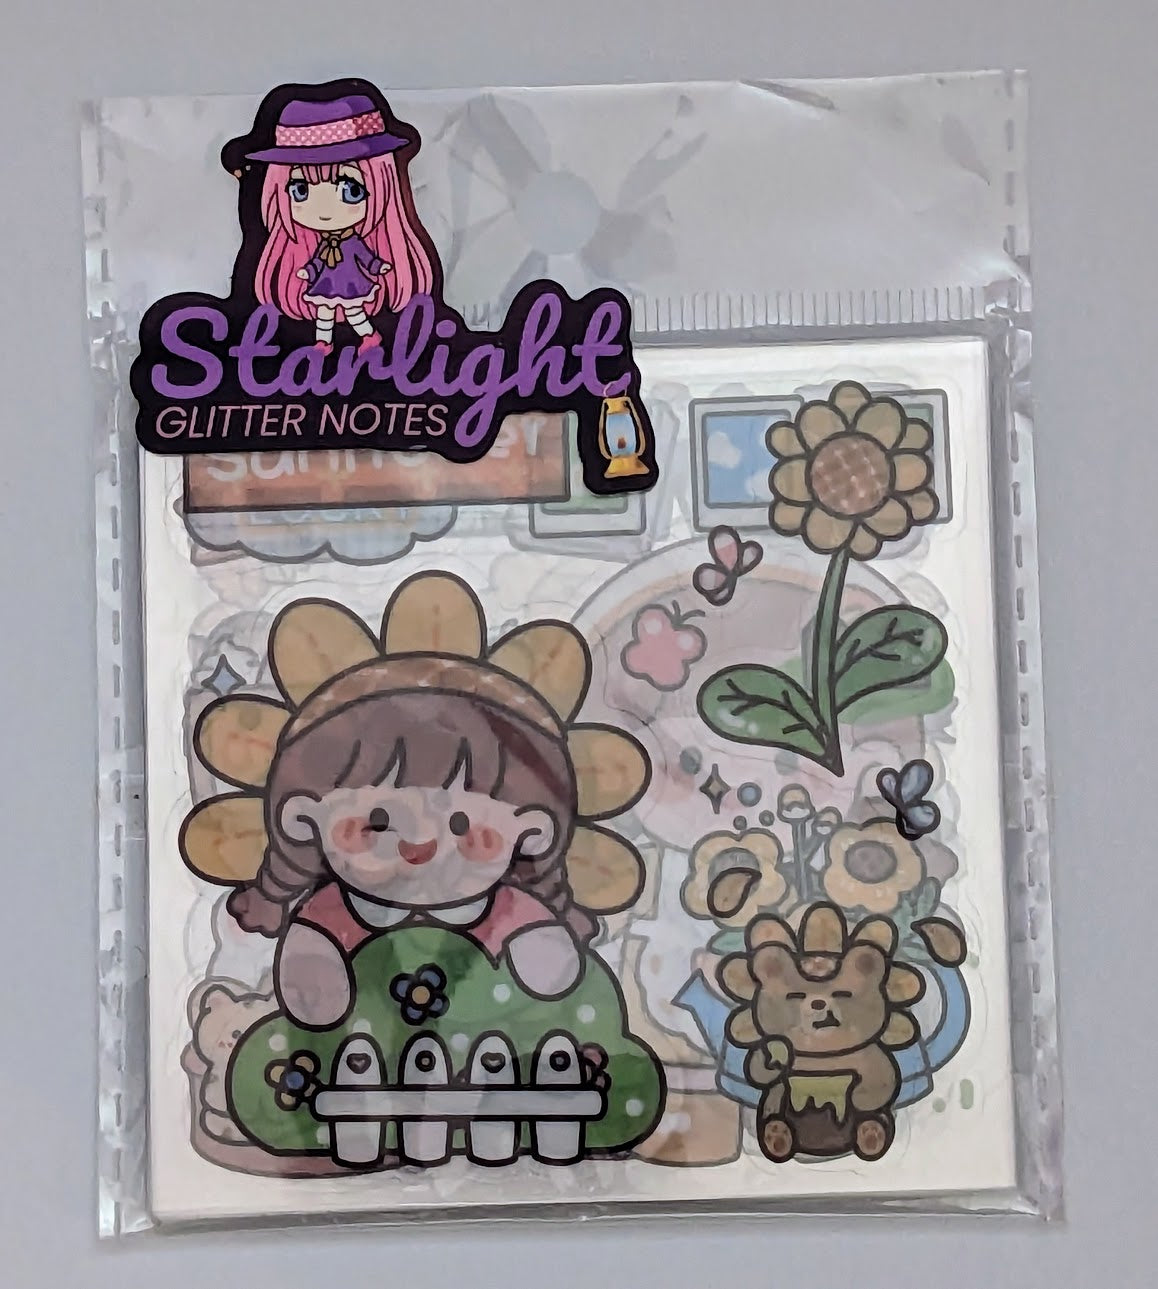 Kawaii Stickers! Great for your planner, journal and even scrapbooking